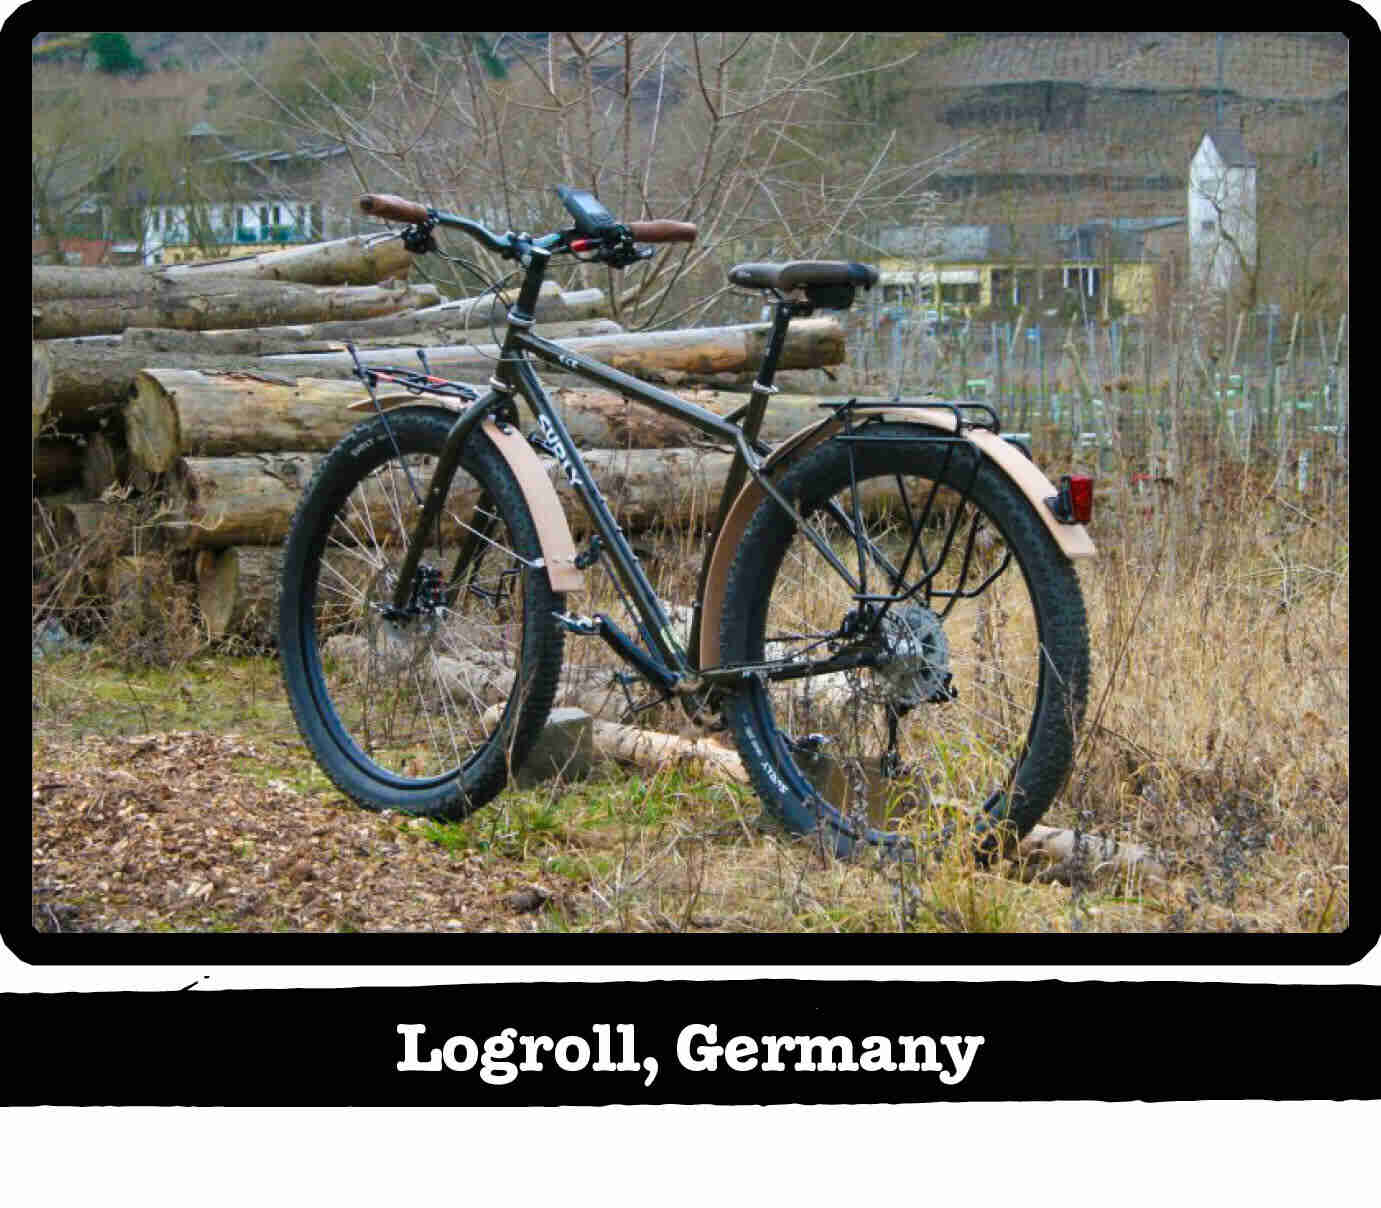 Left side view of a Surly ECR bike, with a pile of longs in background - Logroll, Germany tag below image